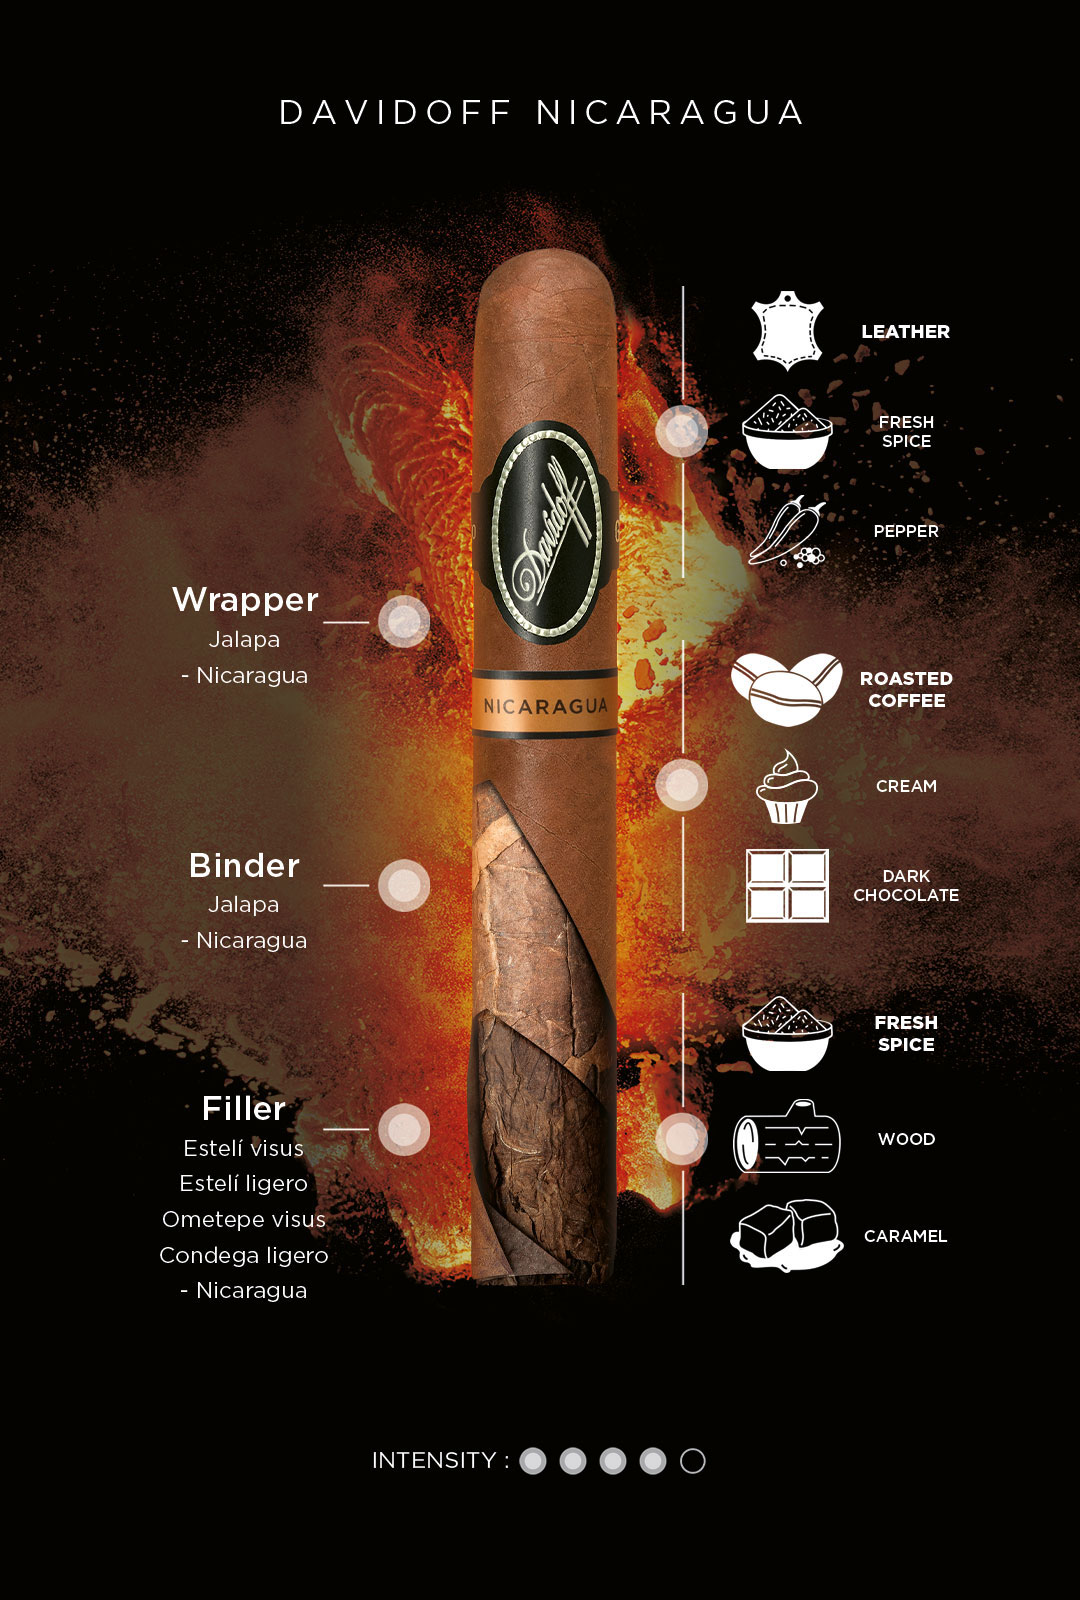 Blend banner of the Davidoff Nicaragua line including tobacco information, aromas and intensity. 